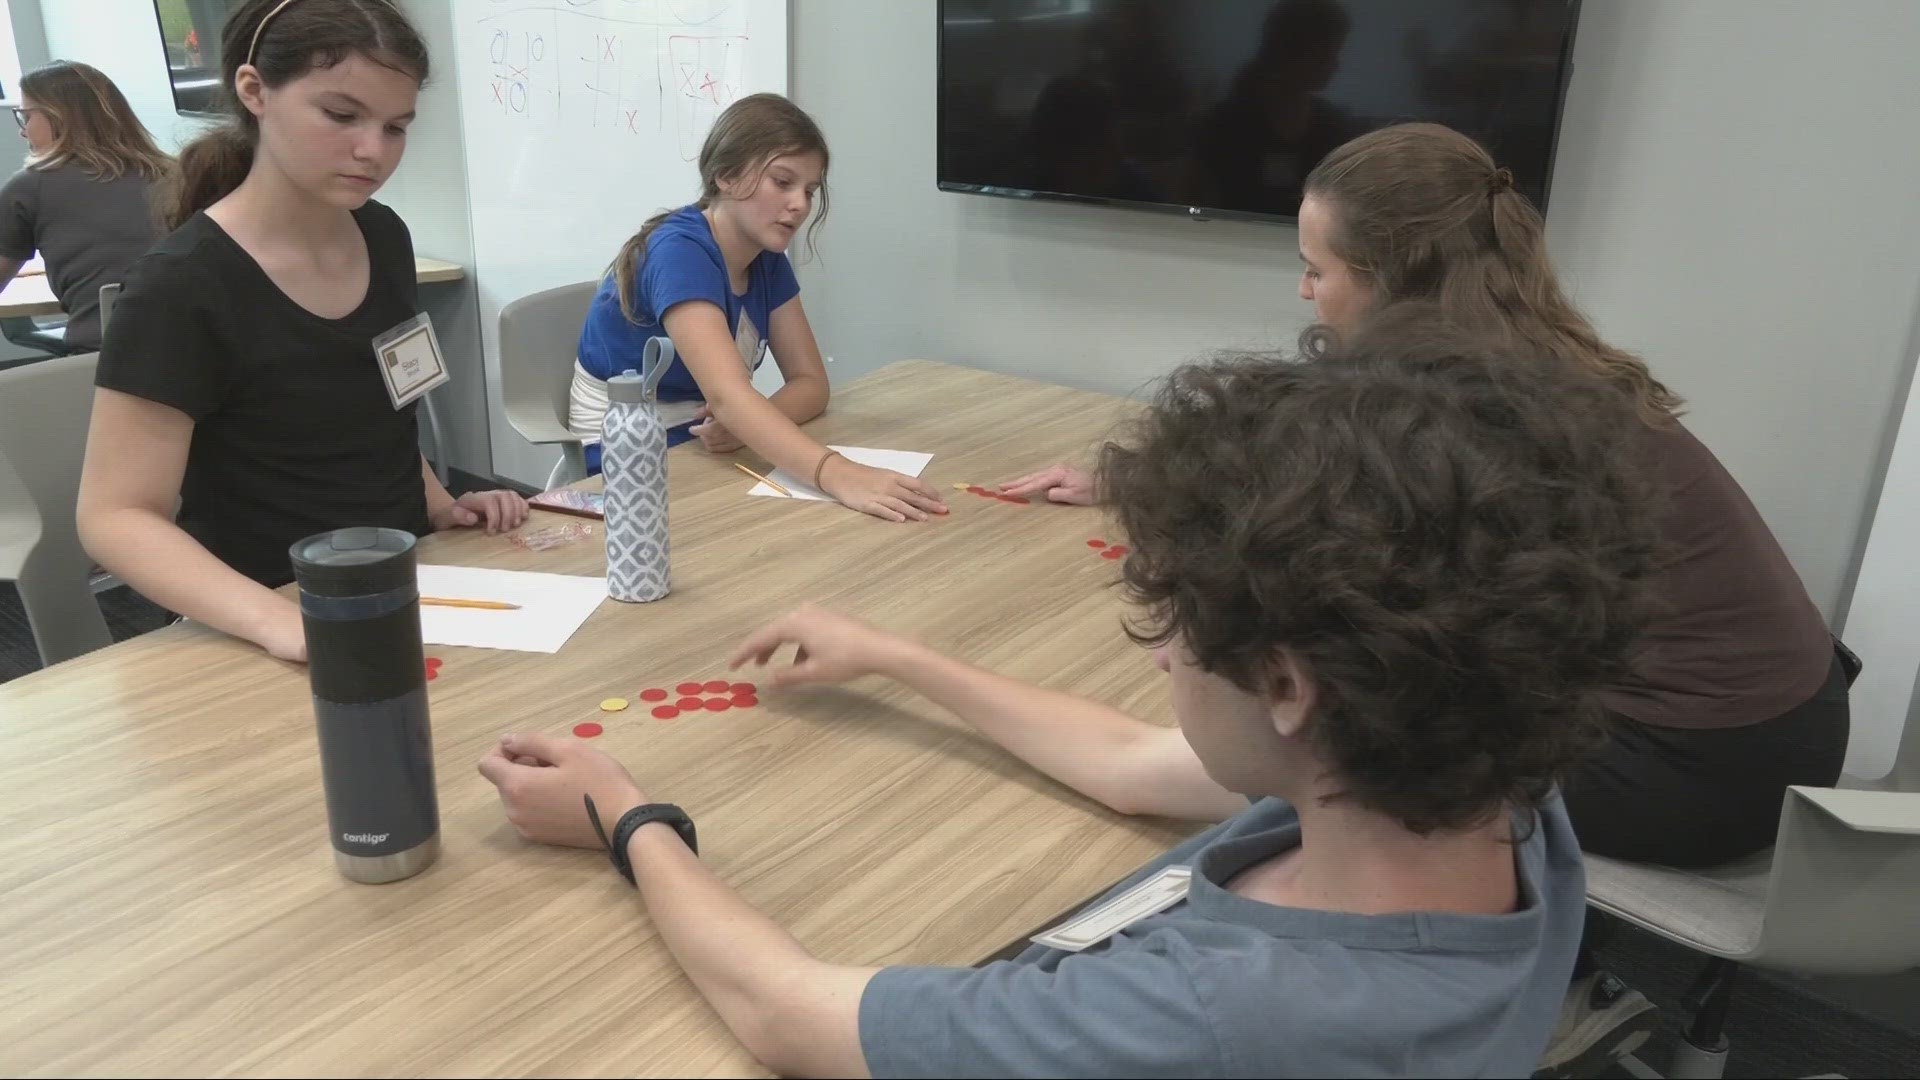 A summer camp on game theory has high school students testing strategies and learned math along the way.